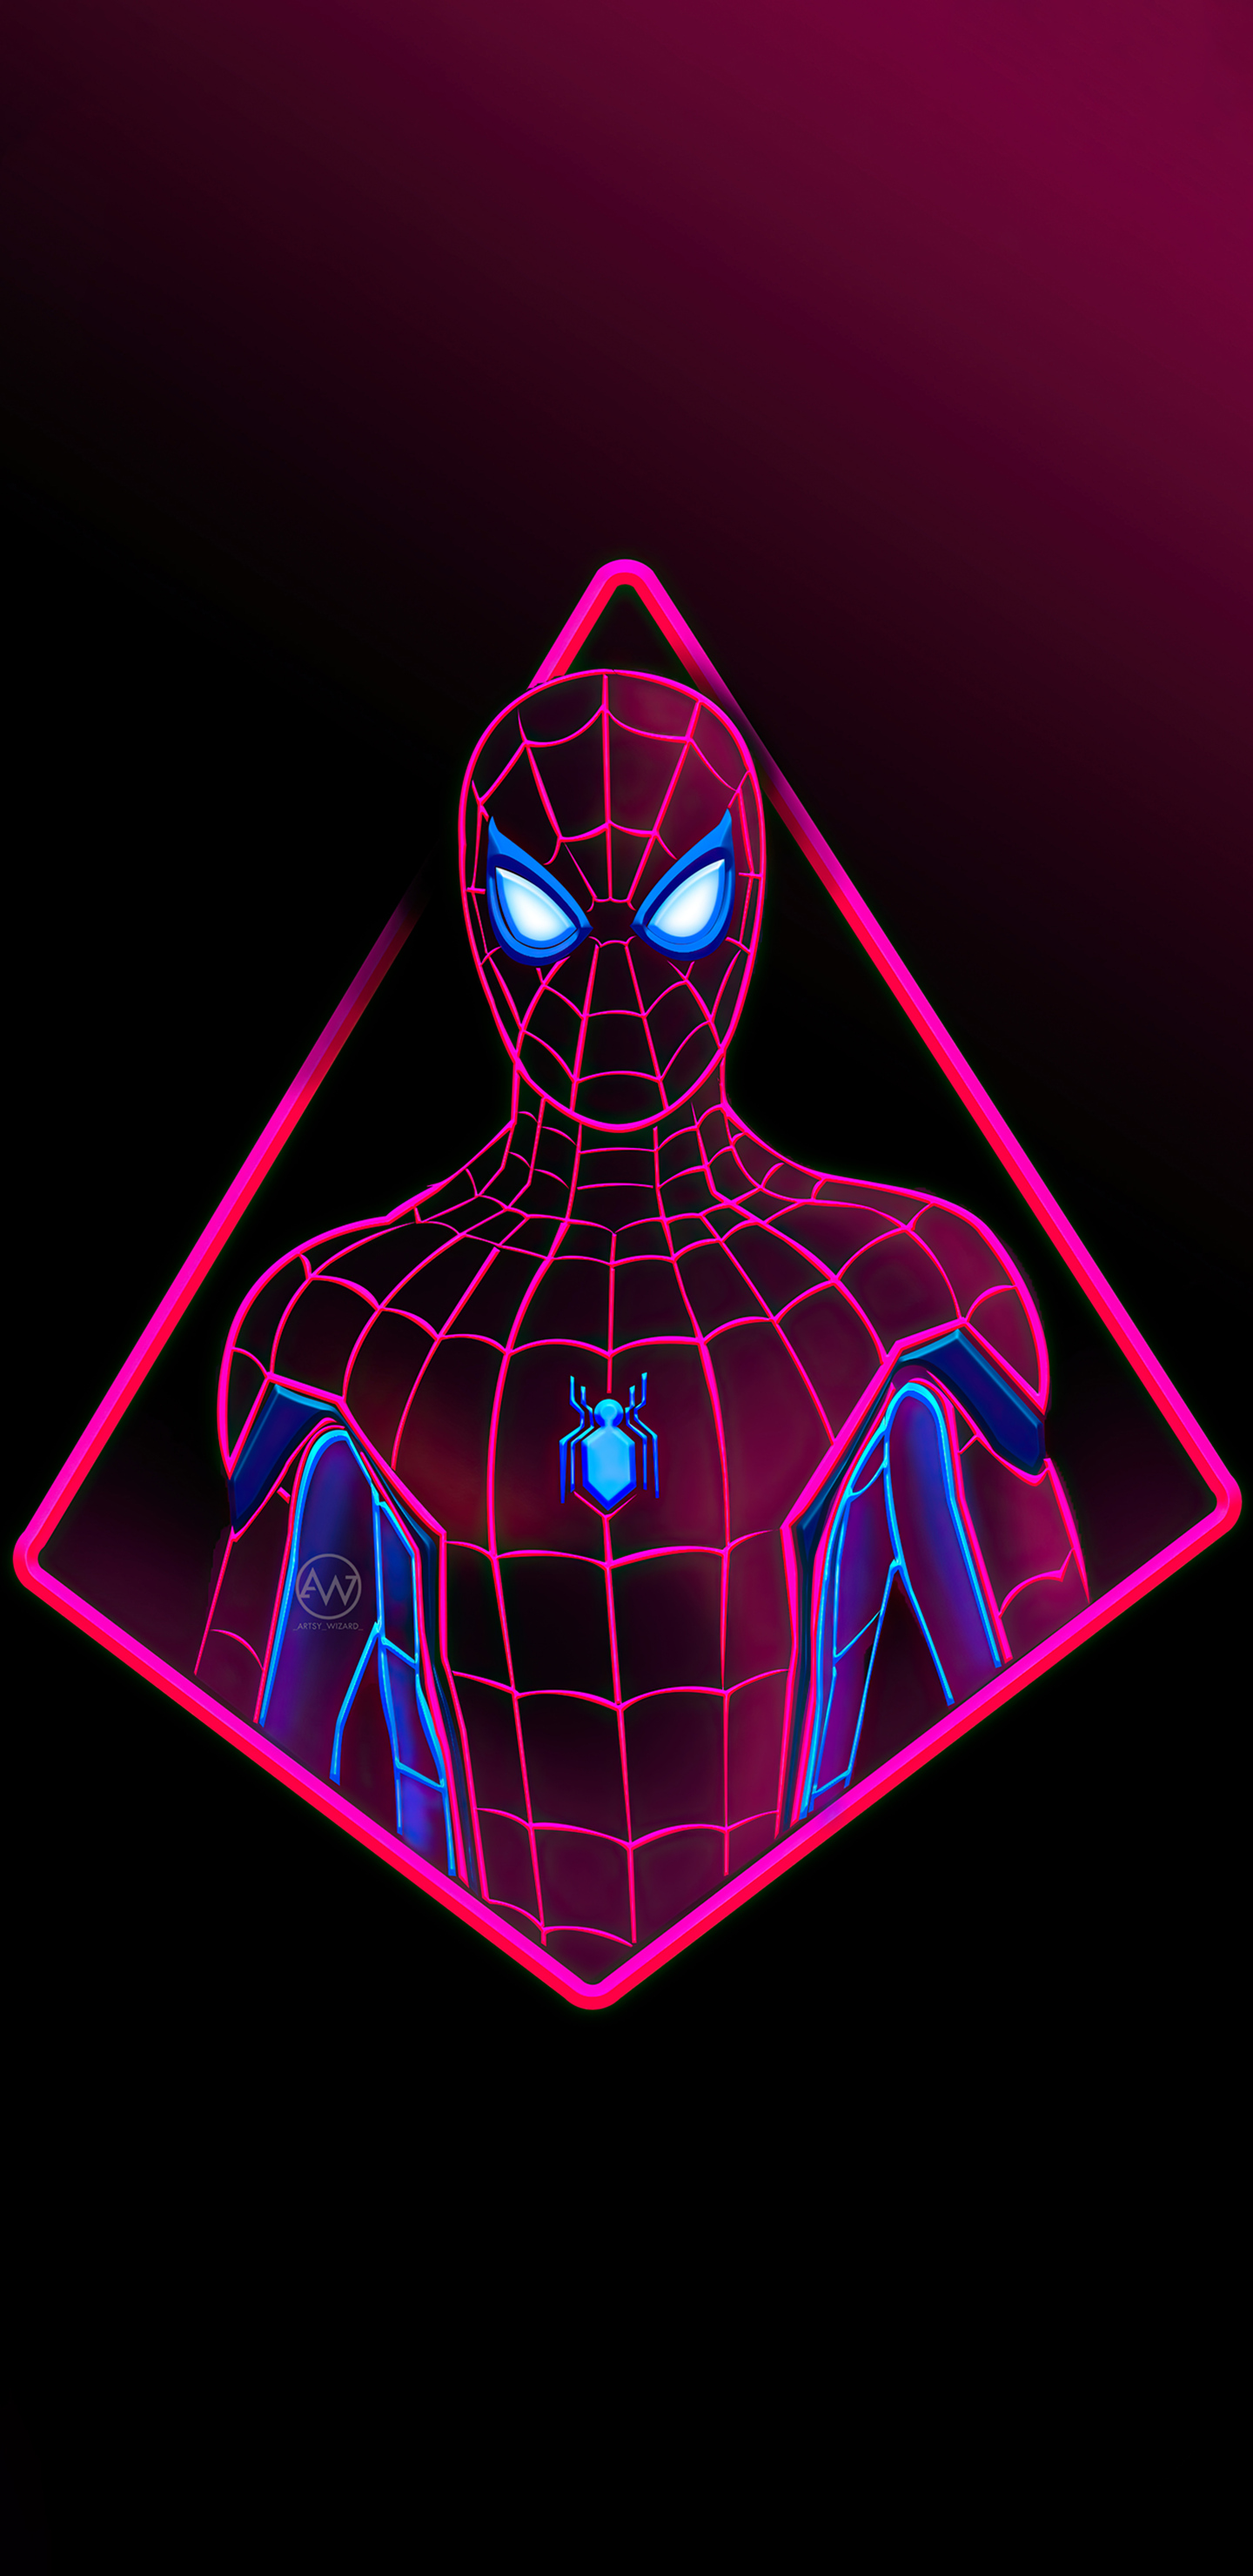 1440x2960 Neon Spiderman 4k Samsung Galaxy Note 9,8, S9,S8,S8+ QHD HD 4k  Wallpapers, Images, Backgrounds, Photos and Pictures